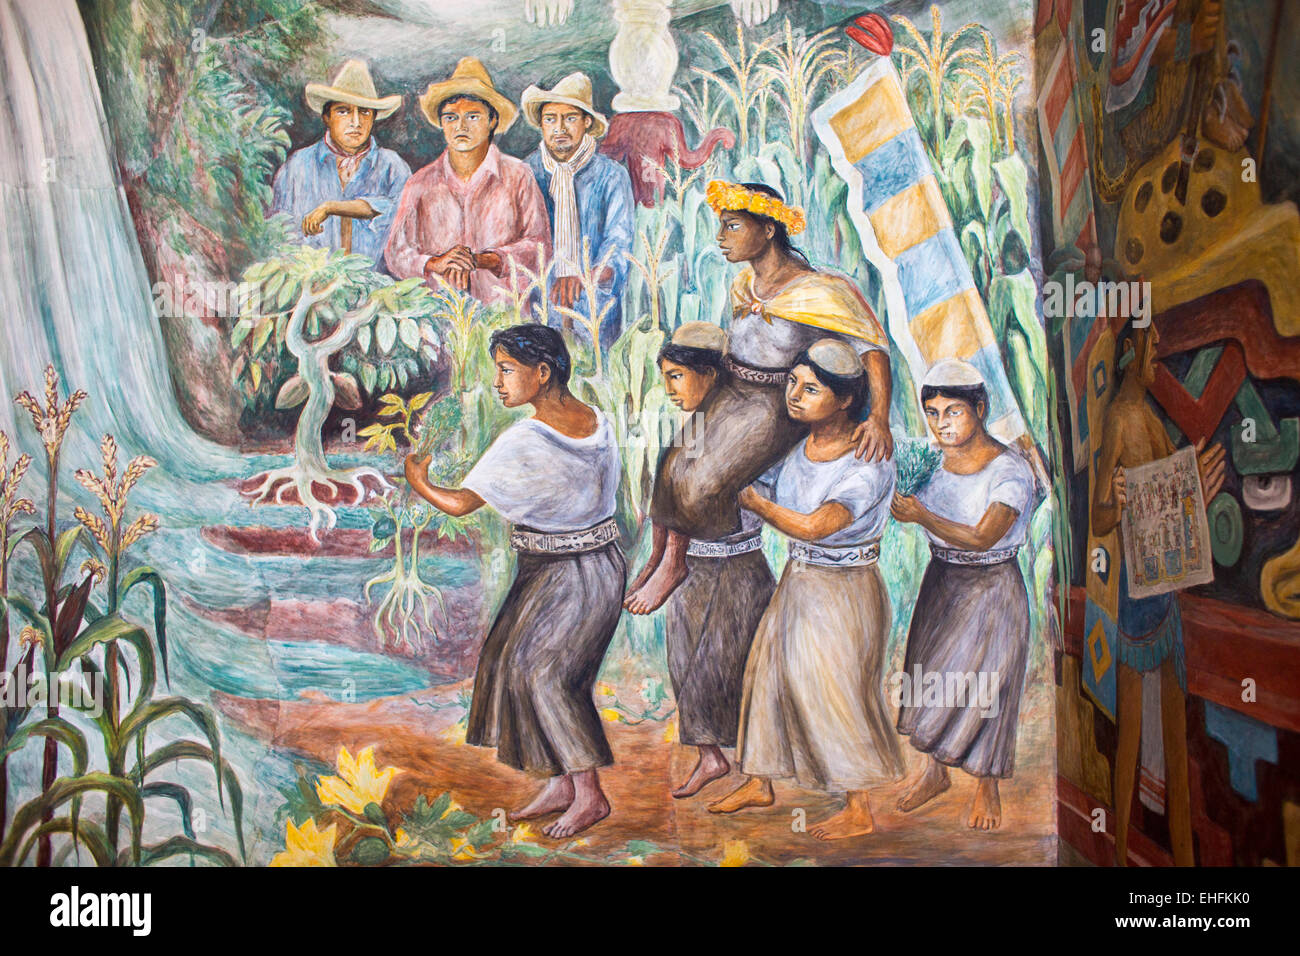 Oaxaca, Mexico - Details of a painting celebrating Oaxaca history and culture by Arturo García Bustos. Stock Photo